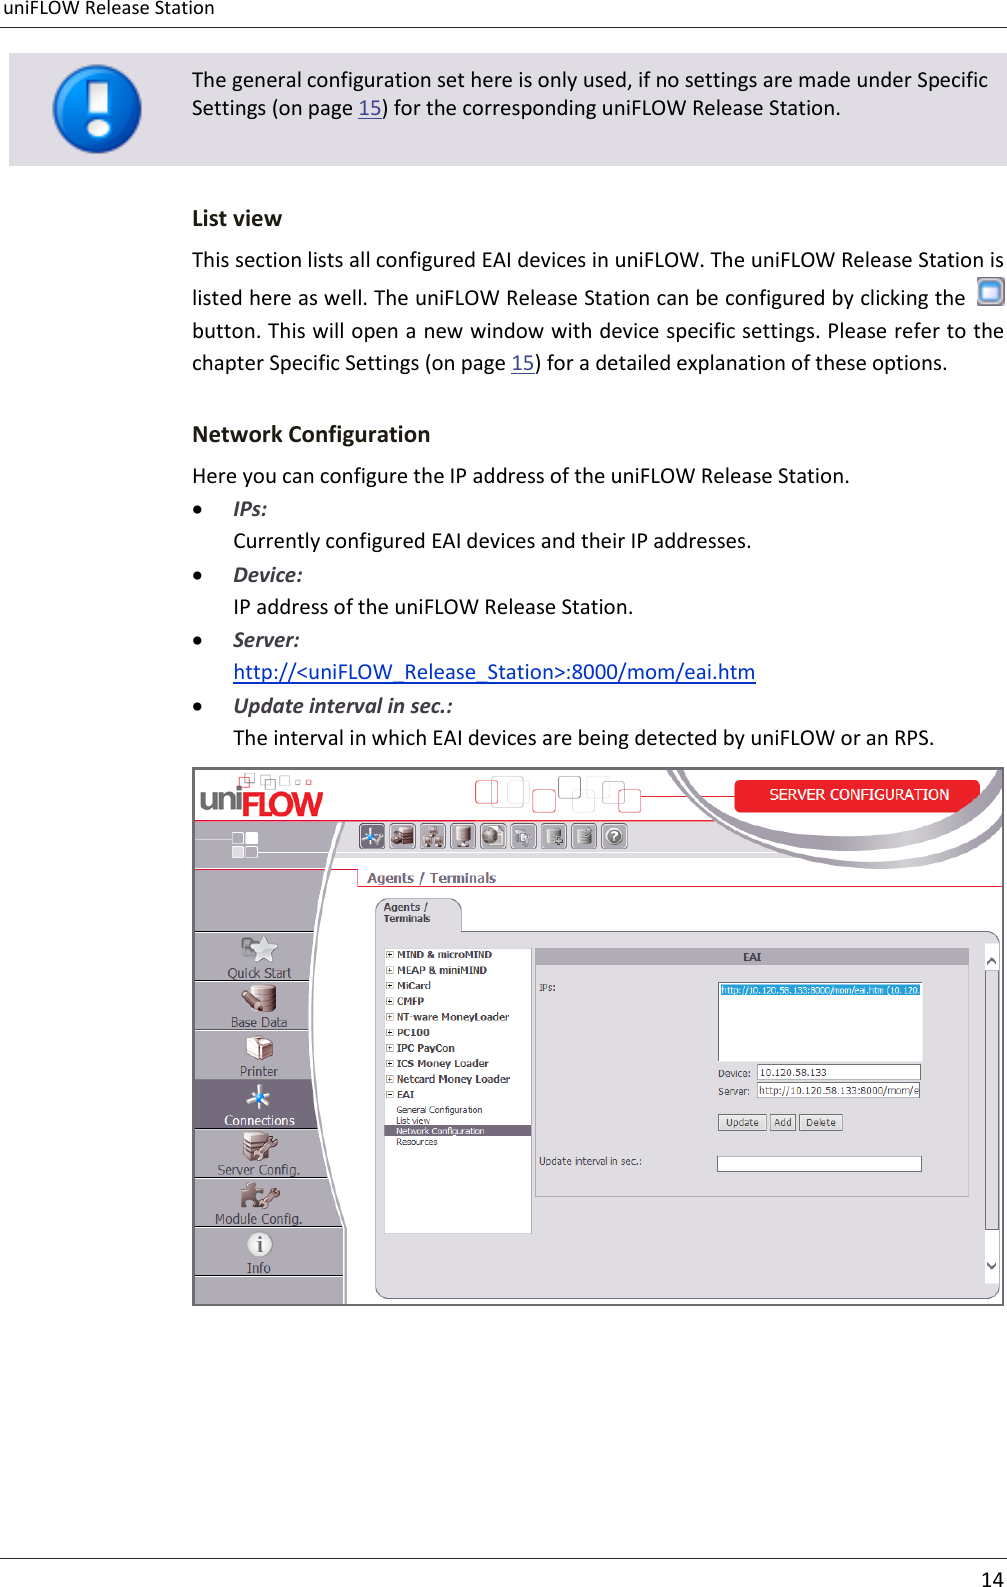 uniFLOW Release Station     14   The general configuration set here is only used, if no settings are made under Specific Settings (on page 15) for the corresponding uniFLOW Release Station. List view This section lists all configured EAI devices in uniFLOW. The uniFLOW Release Station is listed here as well. The uniFLOW Release Station can be configured by clicking the   button. This will open a new window with device specific settings. Please refer to the chapter Specific Settings (on page 15) for a detailed explanation of these options. Network Configuration Here you can configure the IP address of the uniFLOW Release Station.  IPs: Currently configured EAI devices and their IP addresses.  Device: IP address of the uniFLOW Release Station.  Server: http://&lt;uniFLOW_Release_Station&gt;:8000/mom/eai.htm  Update interval in sec.: The interval in which EAI devices are being detected by uniFLOW or an RPS.   